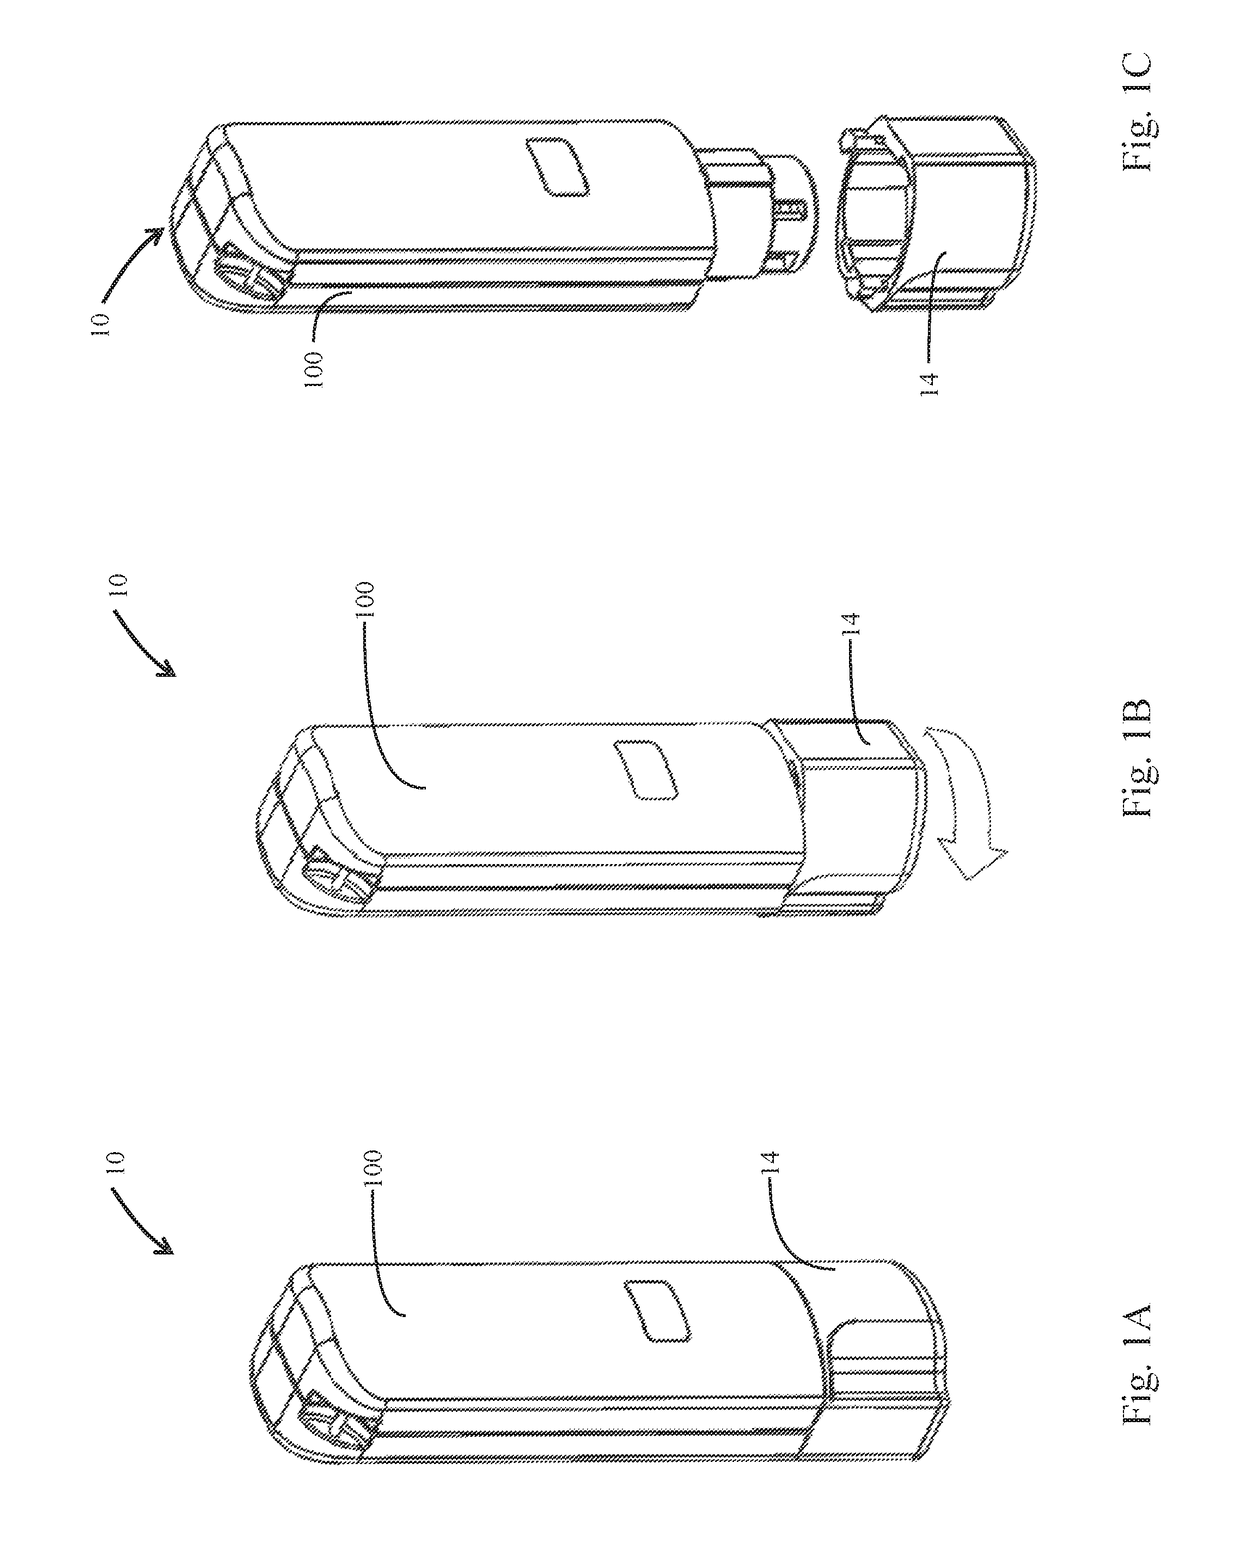 Mixing and injection device with sterility features